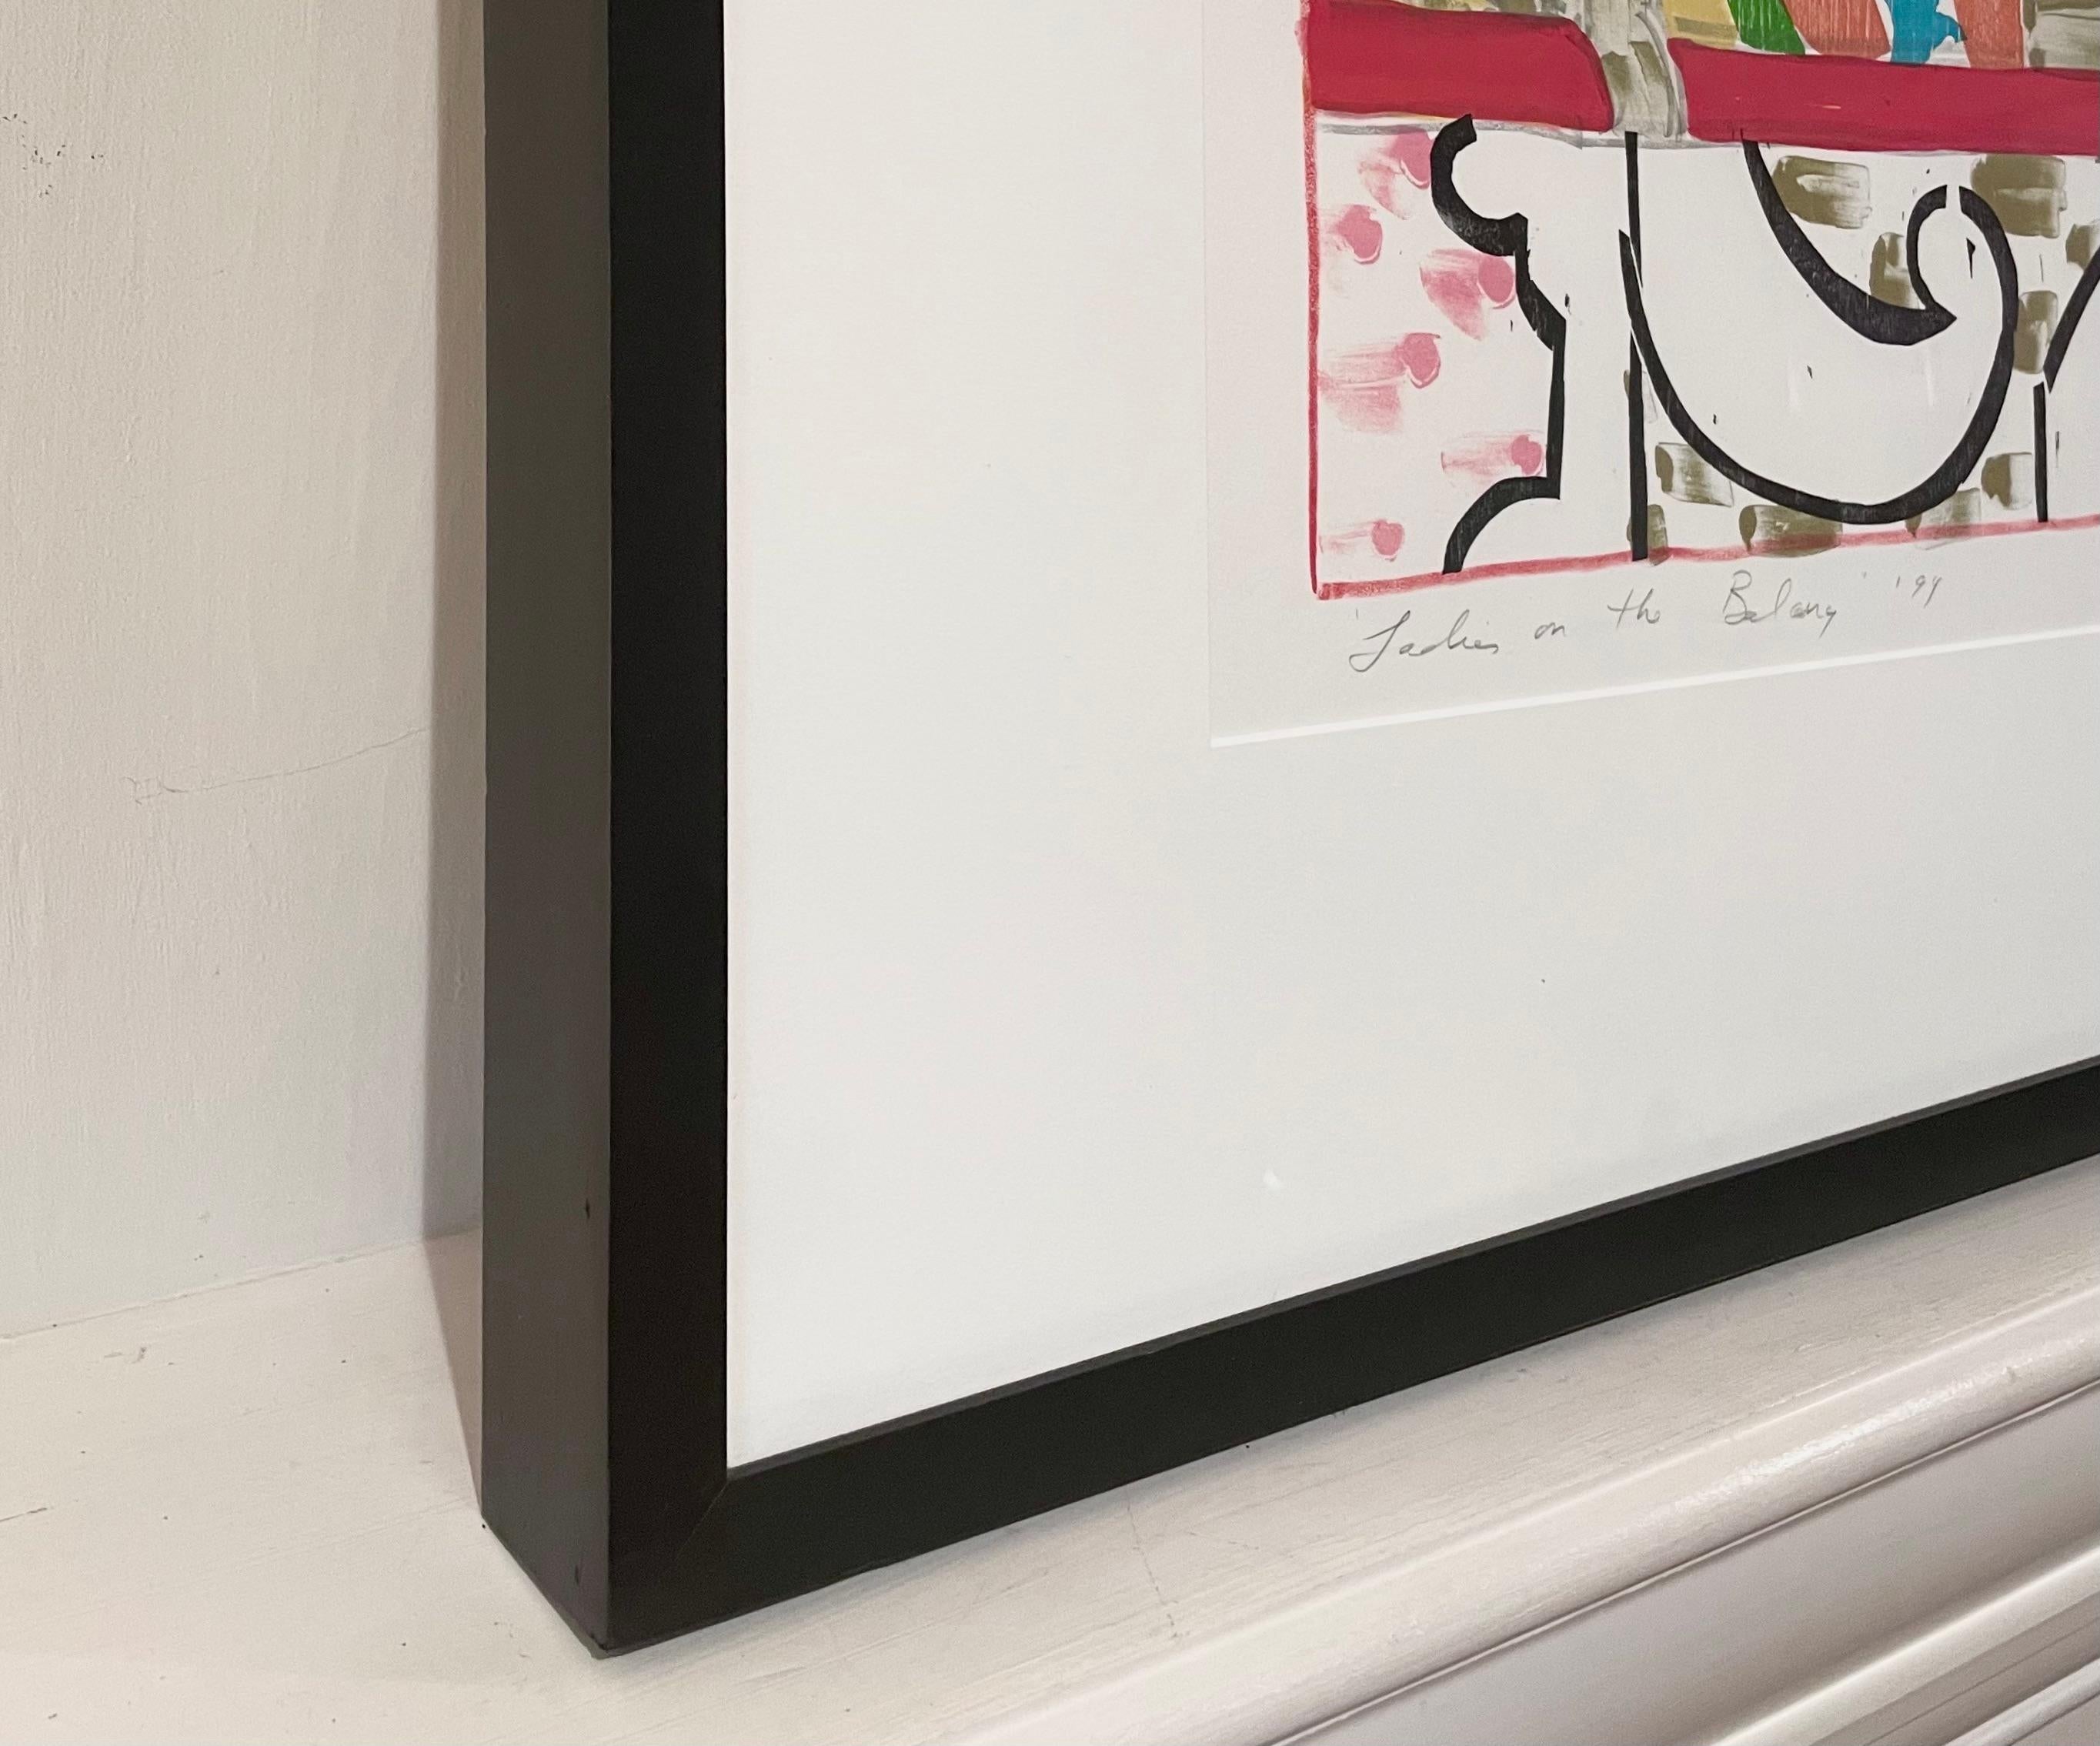 This is a rare large-scale framed abstract woodcut / lithograph, #5/30, by celebrated artist Betty Woodman. It depicts the colorful, abstracted forms of three Japanese ceramic vases in an architectural setting. It comes framed in a narrow,